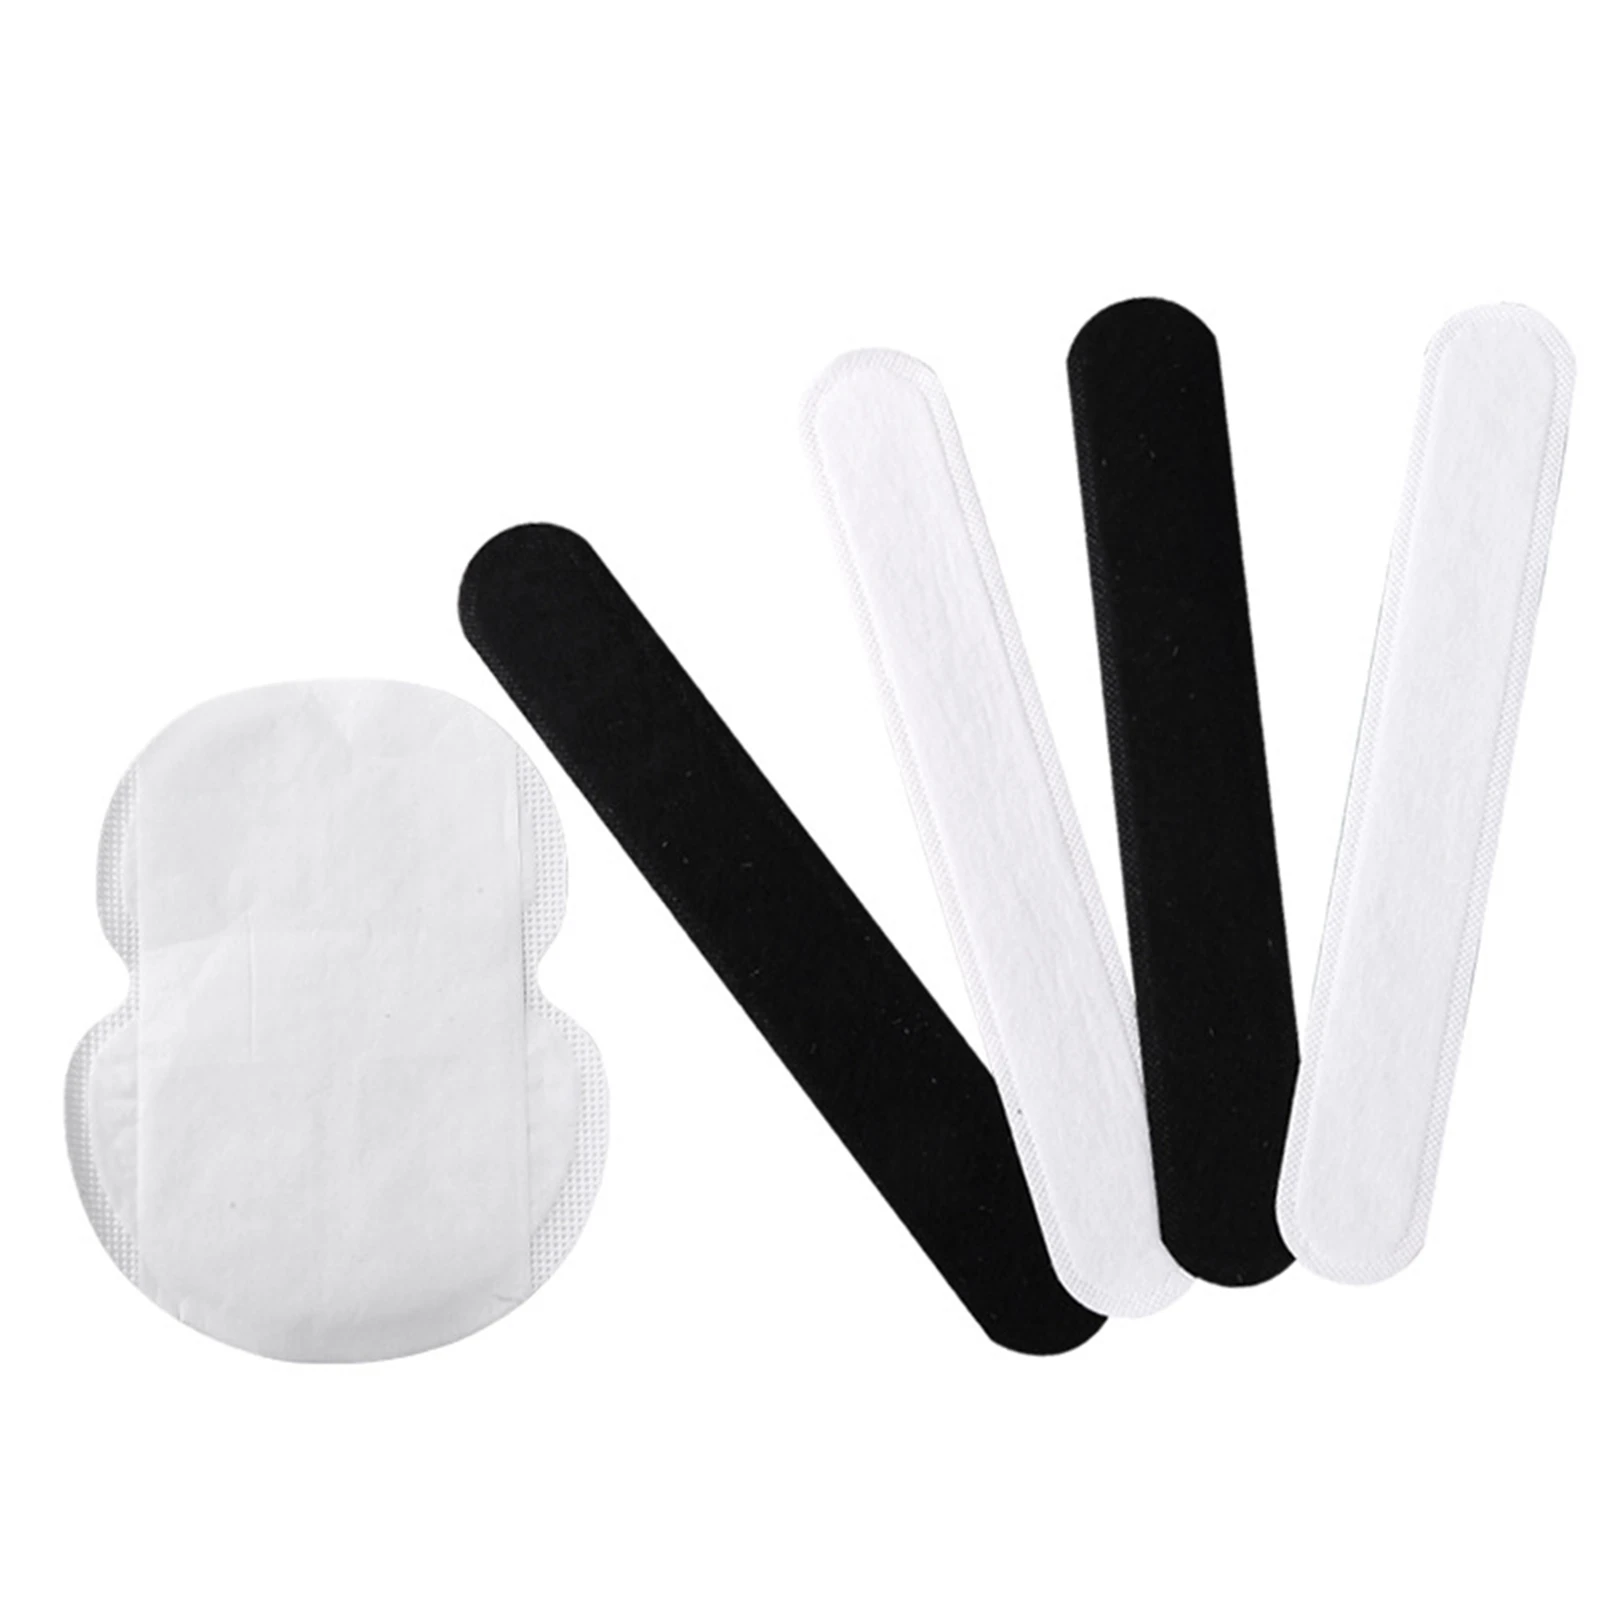 

10pc Disposable Hat Sweat Liner Cap Pads Sweat-Absorbing Non-Woven Stickers For Hat And Collar Deodorants Sticker Neck Liner Pad